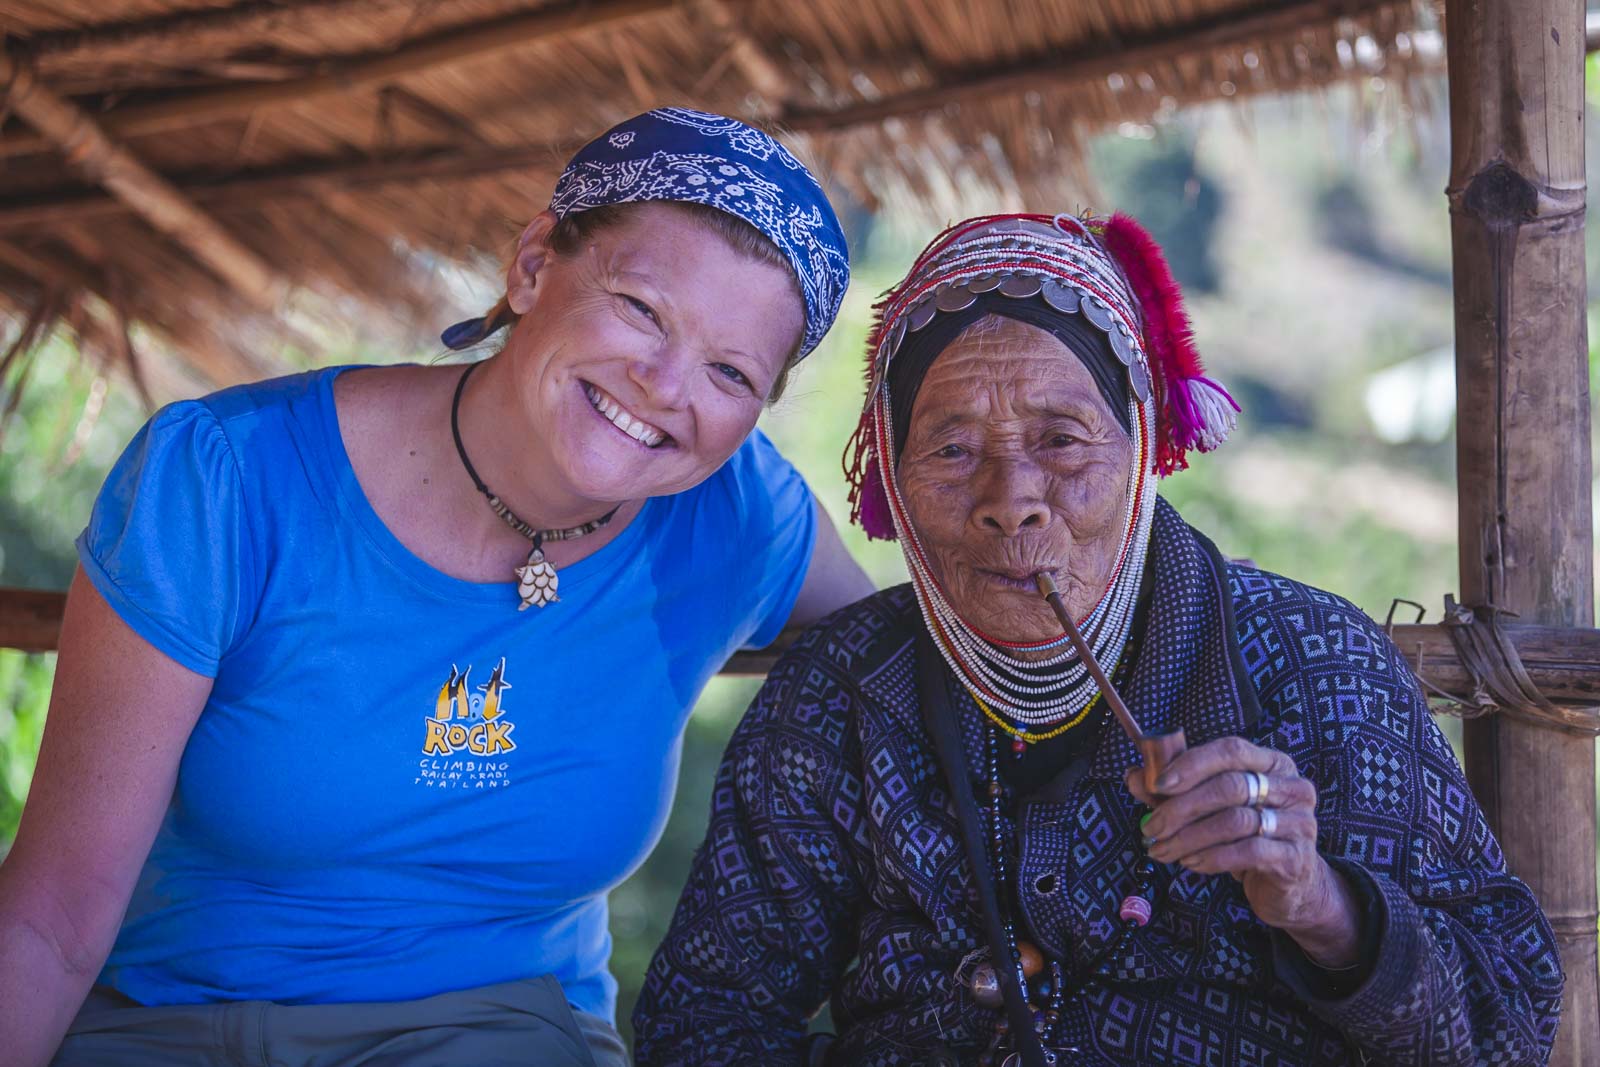 Things to do in chiang Mai visit the Hmong People